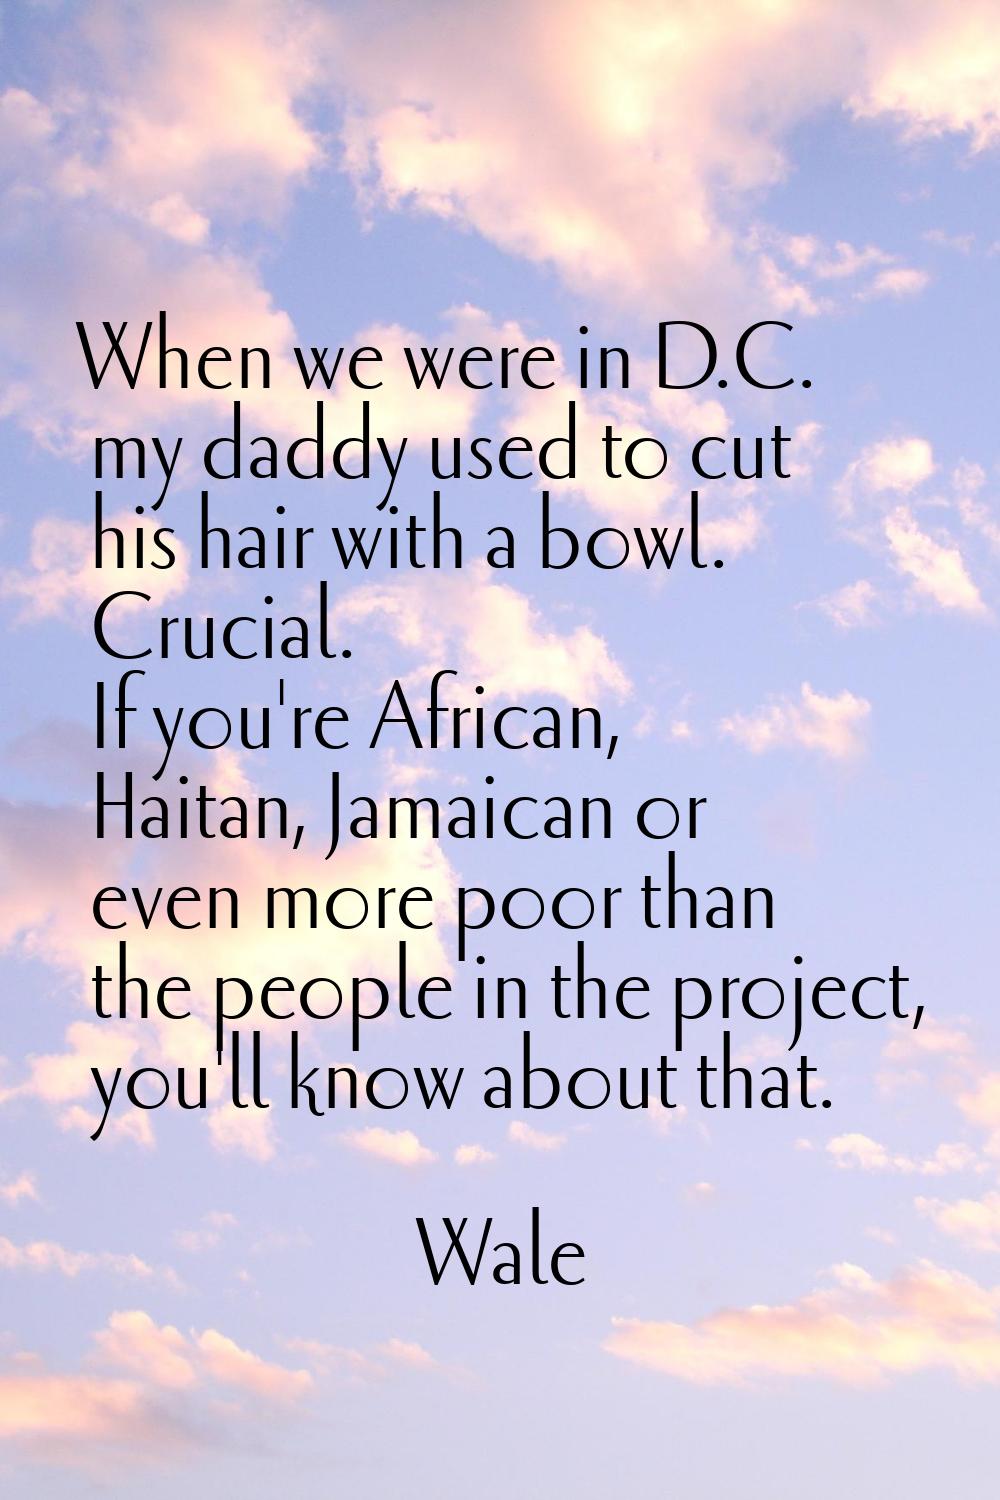 When we were in D.C. my daddy used to cut his hair with a bowl. Crucial. If you're African, Haitan,